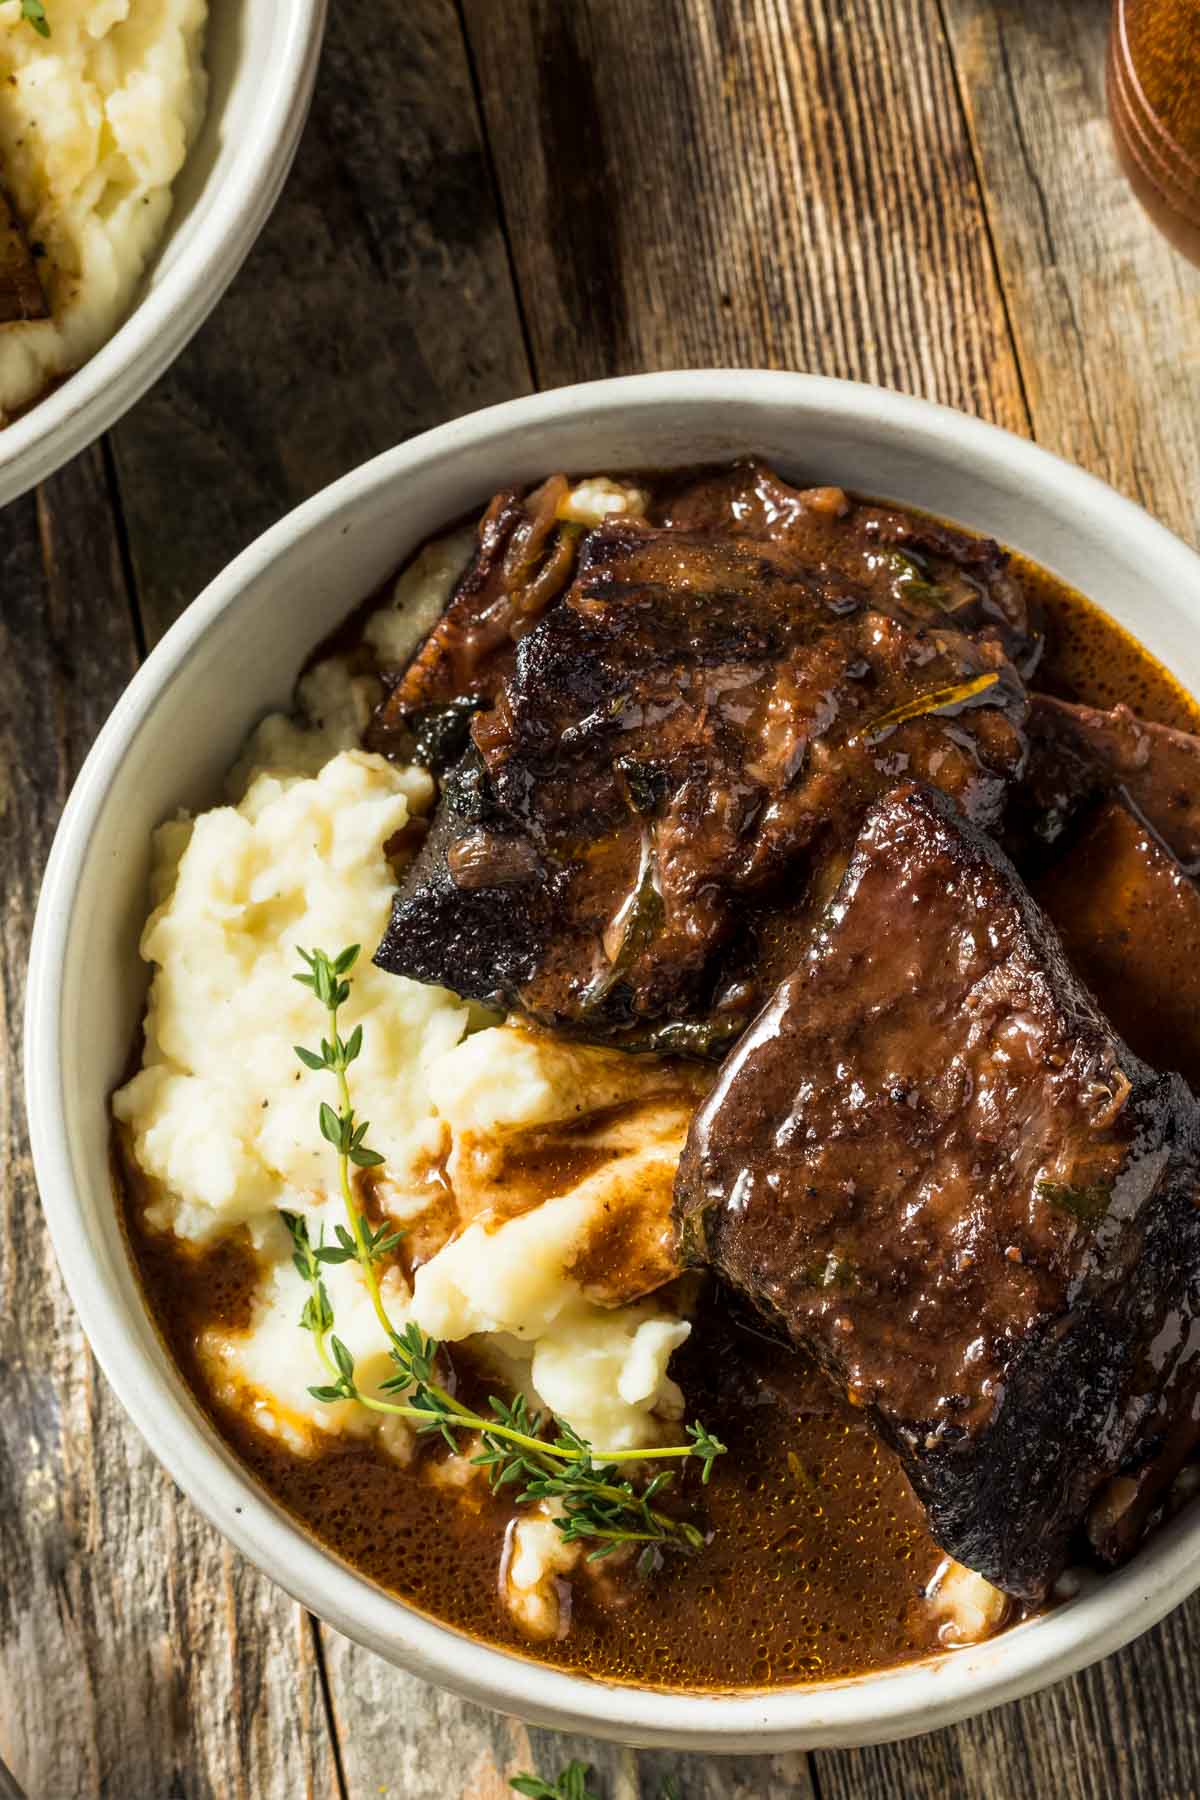 Incredible Braised Beef Short Ribs With Red Wine & Garlic